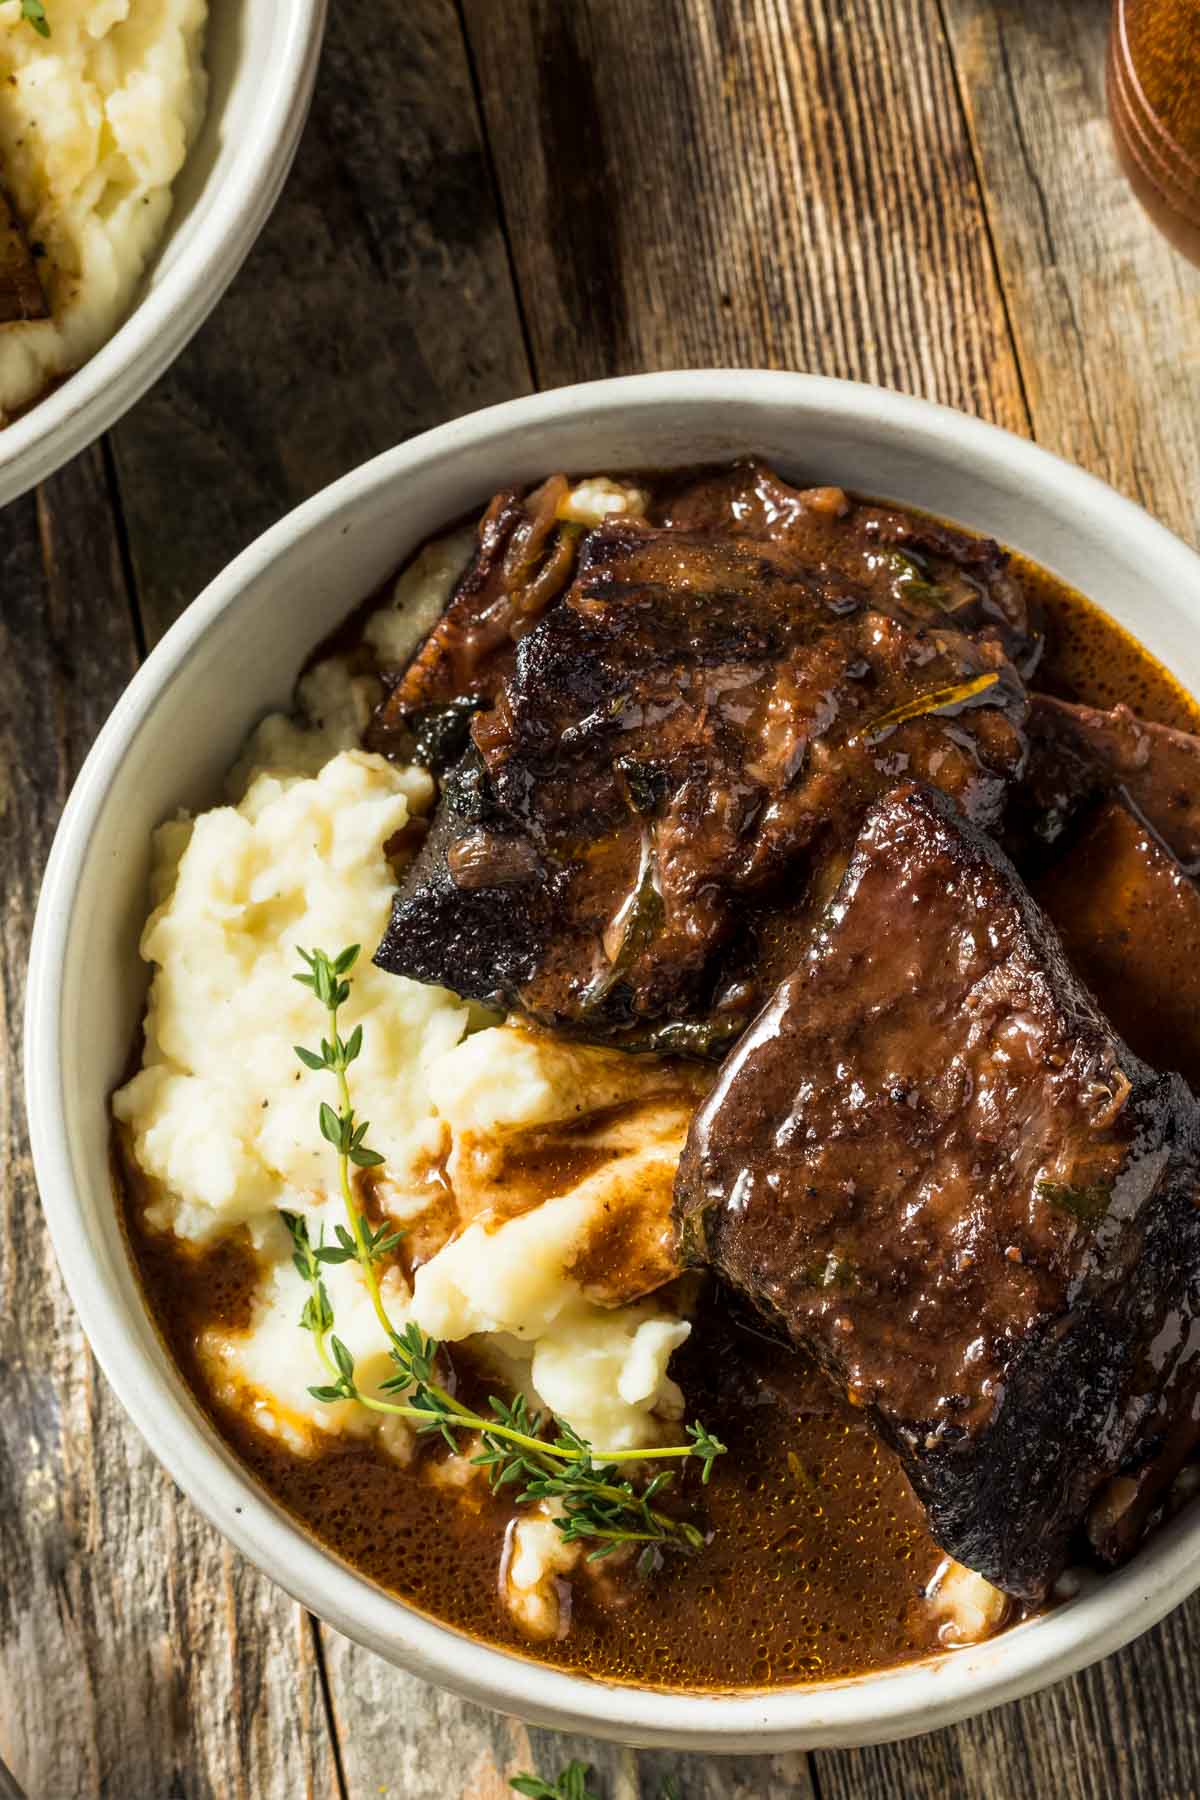 Incredible Braised Beef Short Ribs With Red Wine & Garlic